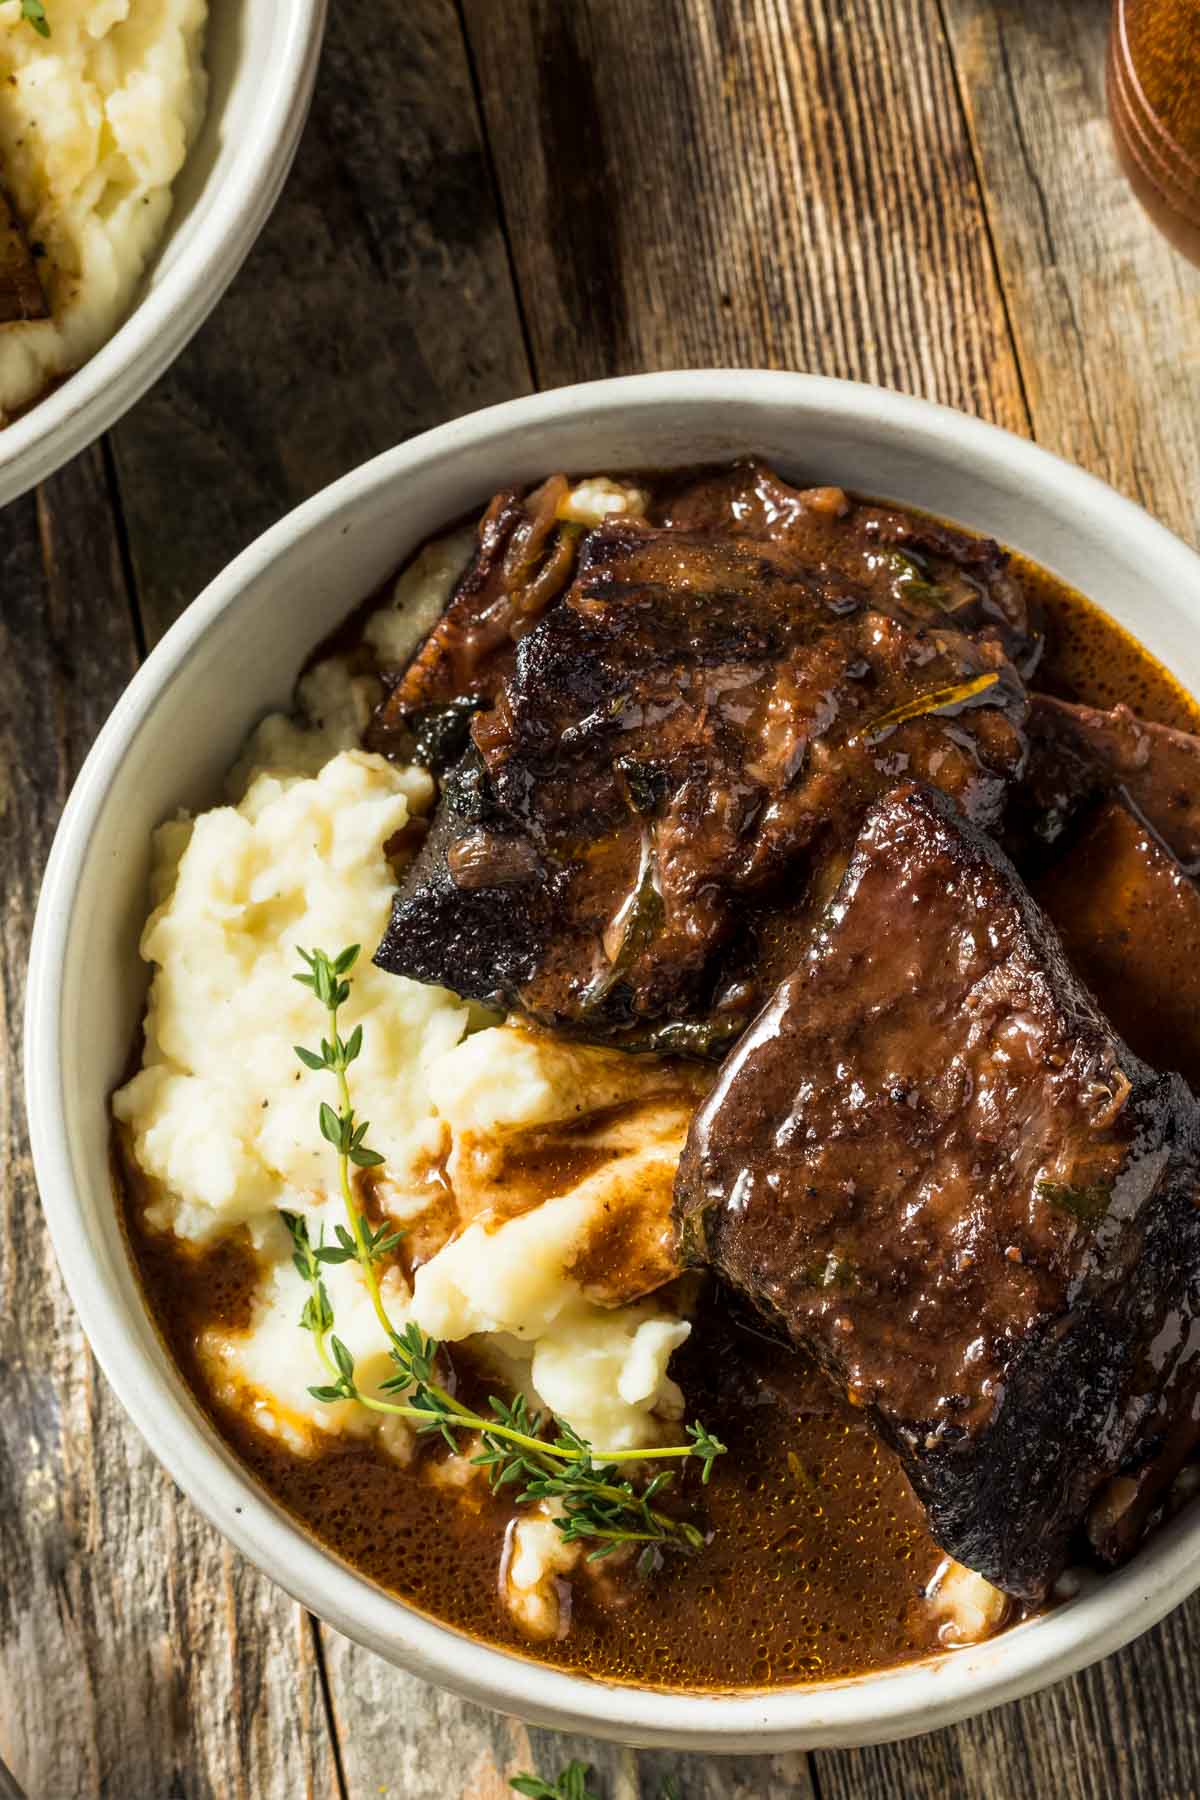 Incredible Braised Beef Short Ribs With Red Wine & Garlic